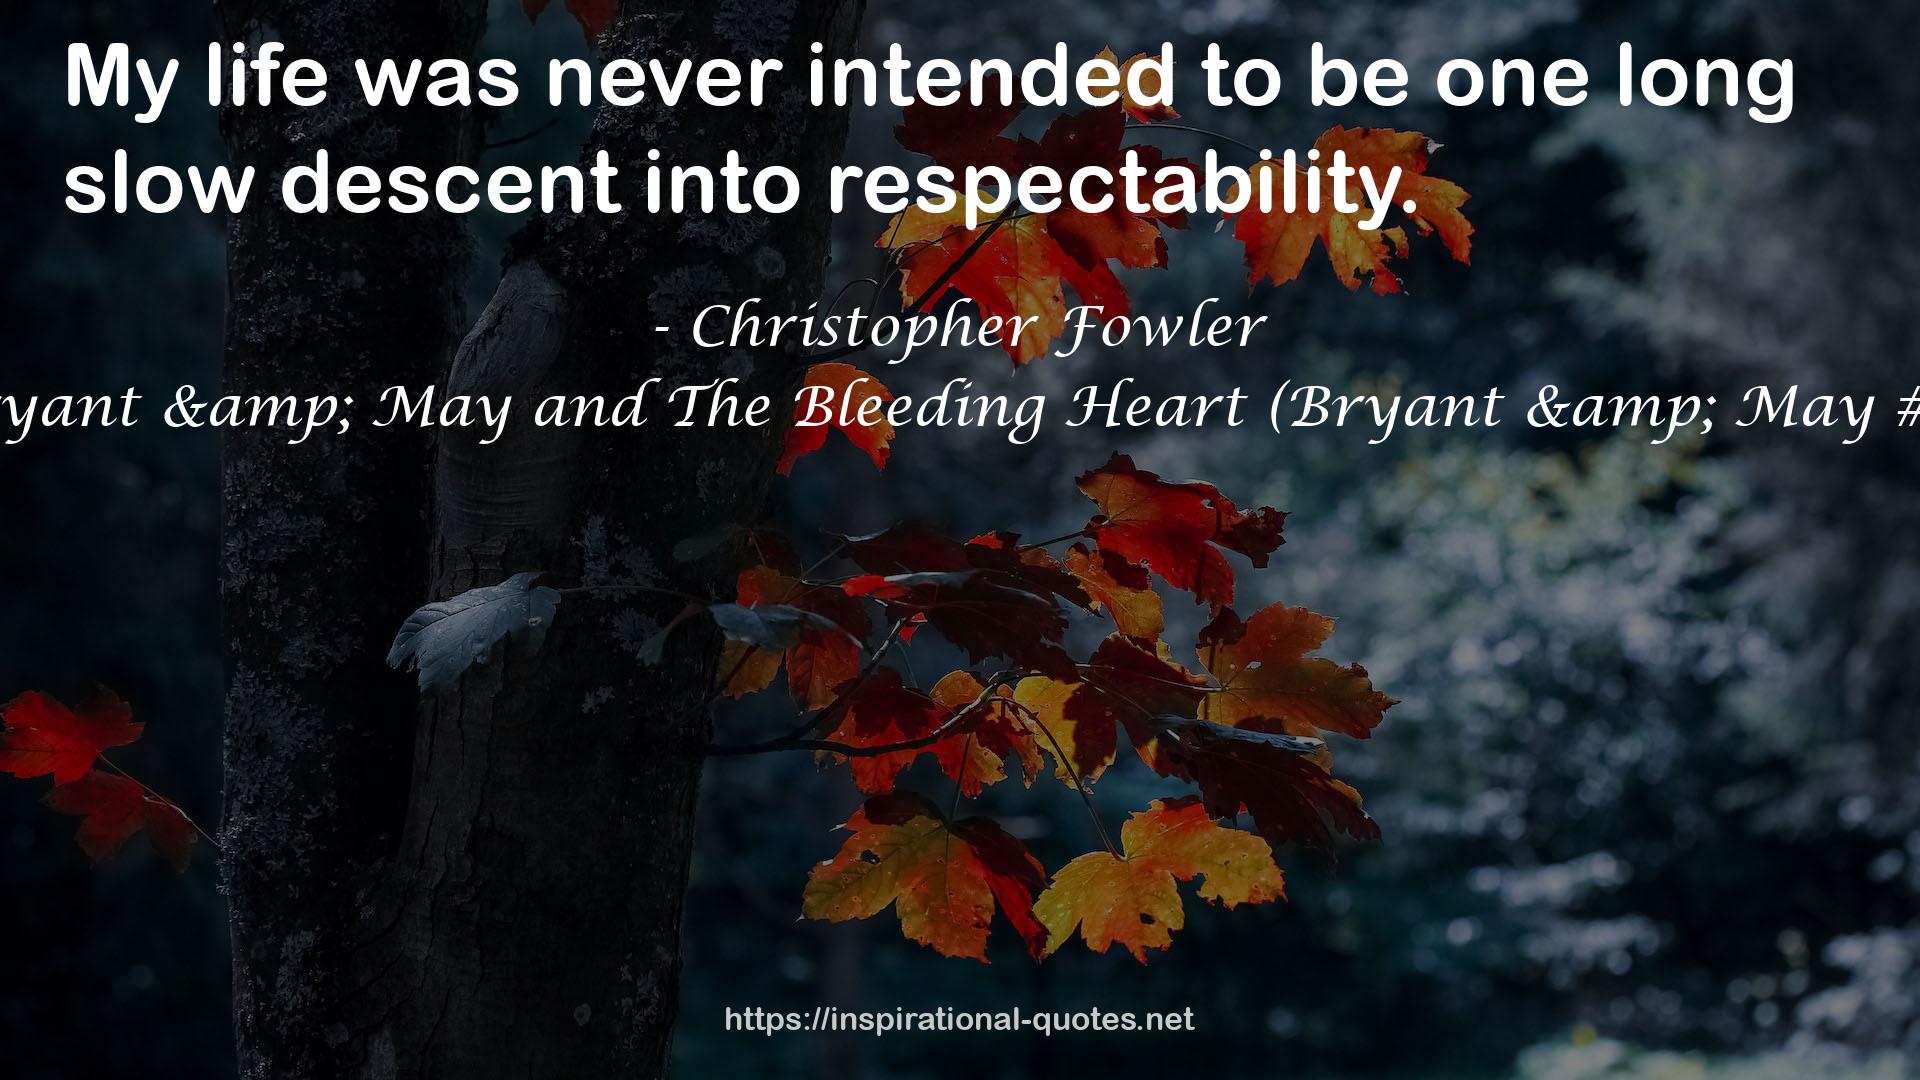 Bryant & May and The Bleeding Heart (Bryant & May #11) QUOTES